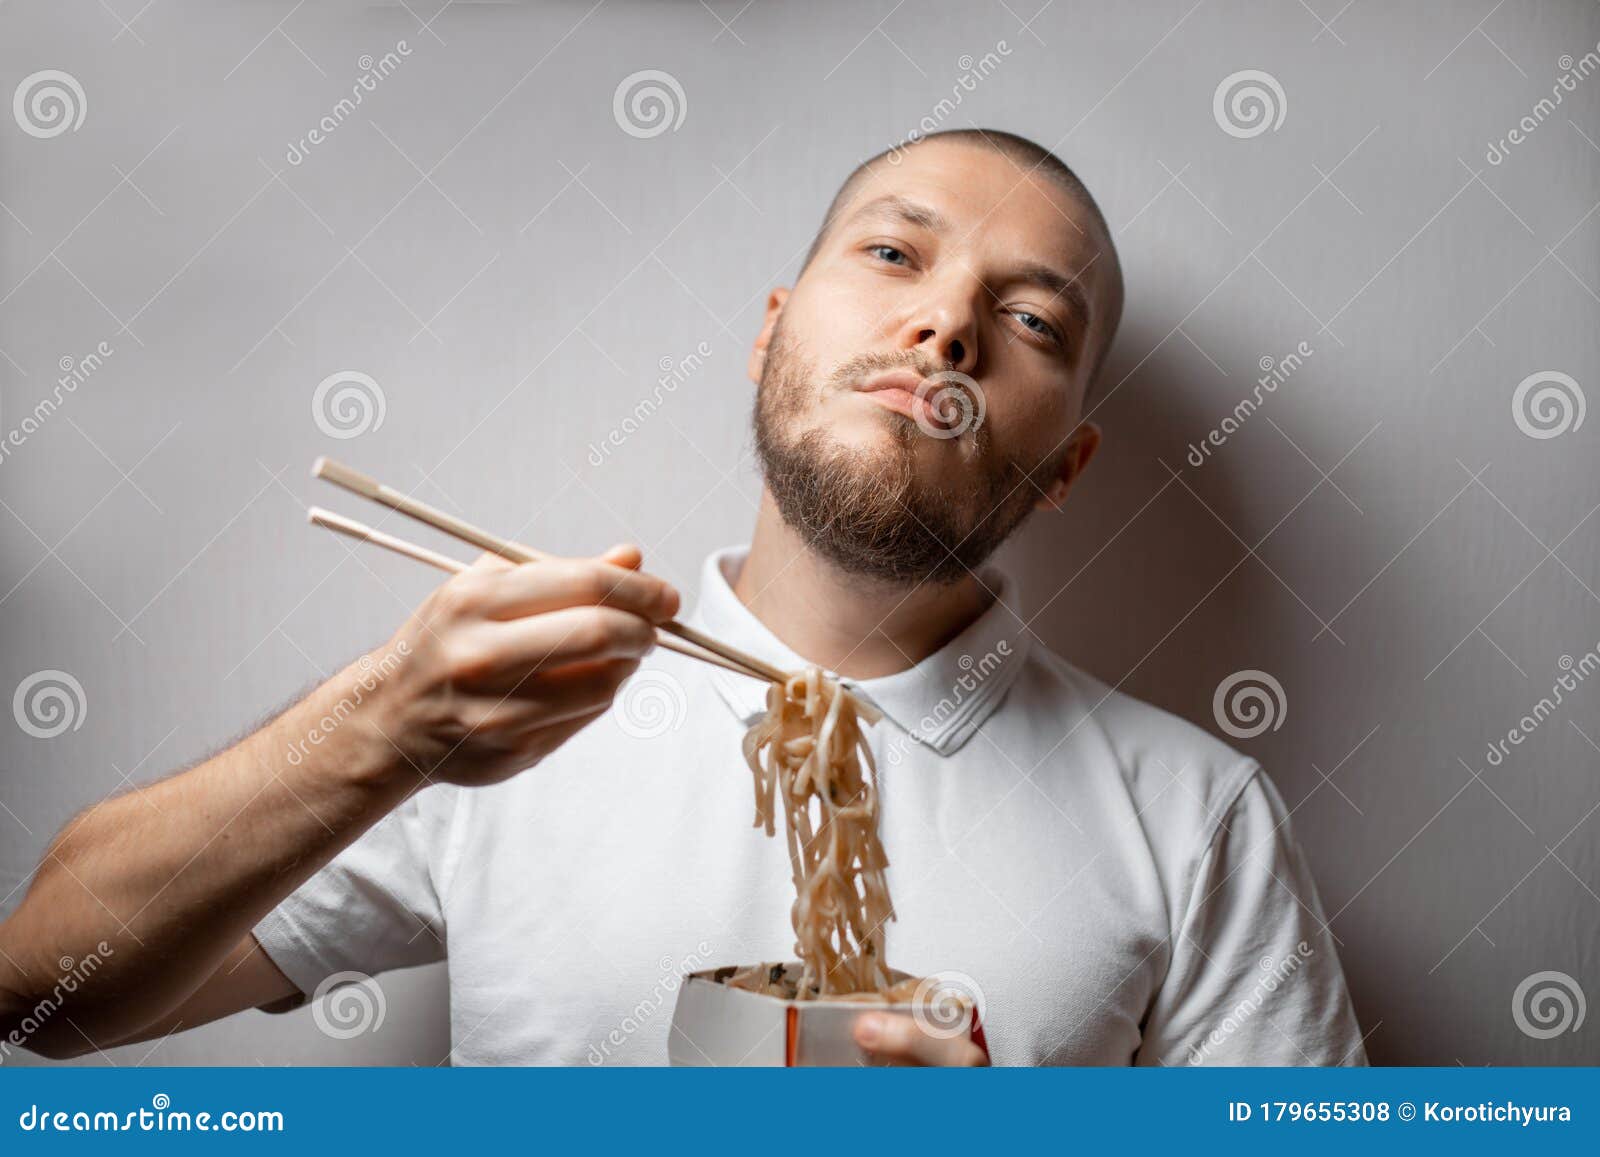 Handsome Young Man Eats Noodles from Food Delivery on a White ...